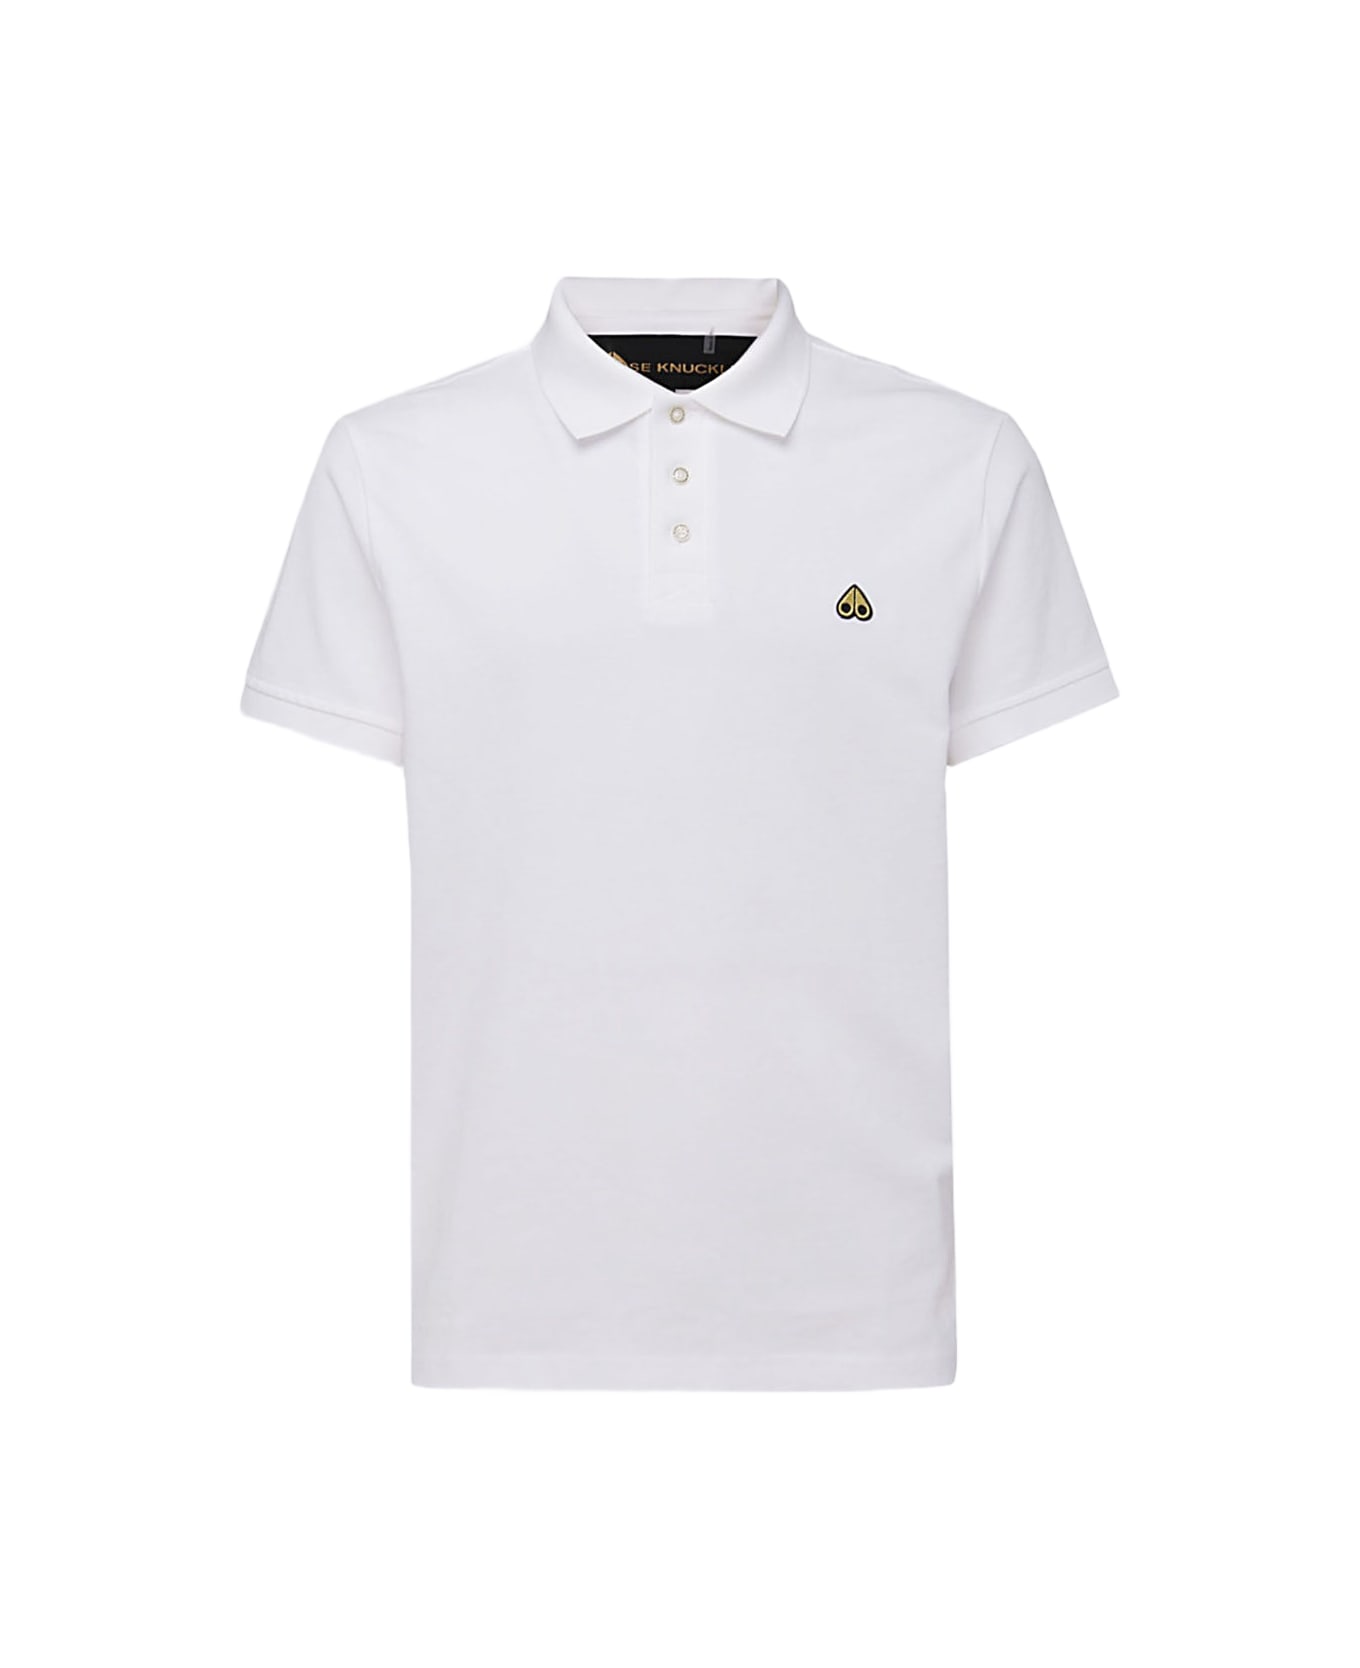 Moose Knuckles White Cotton Polo Shirt - White ポロシャツ